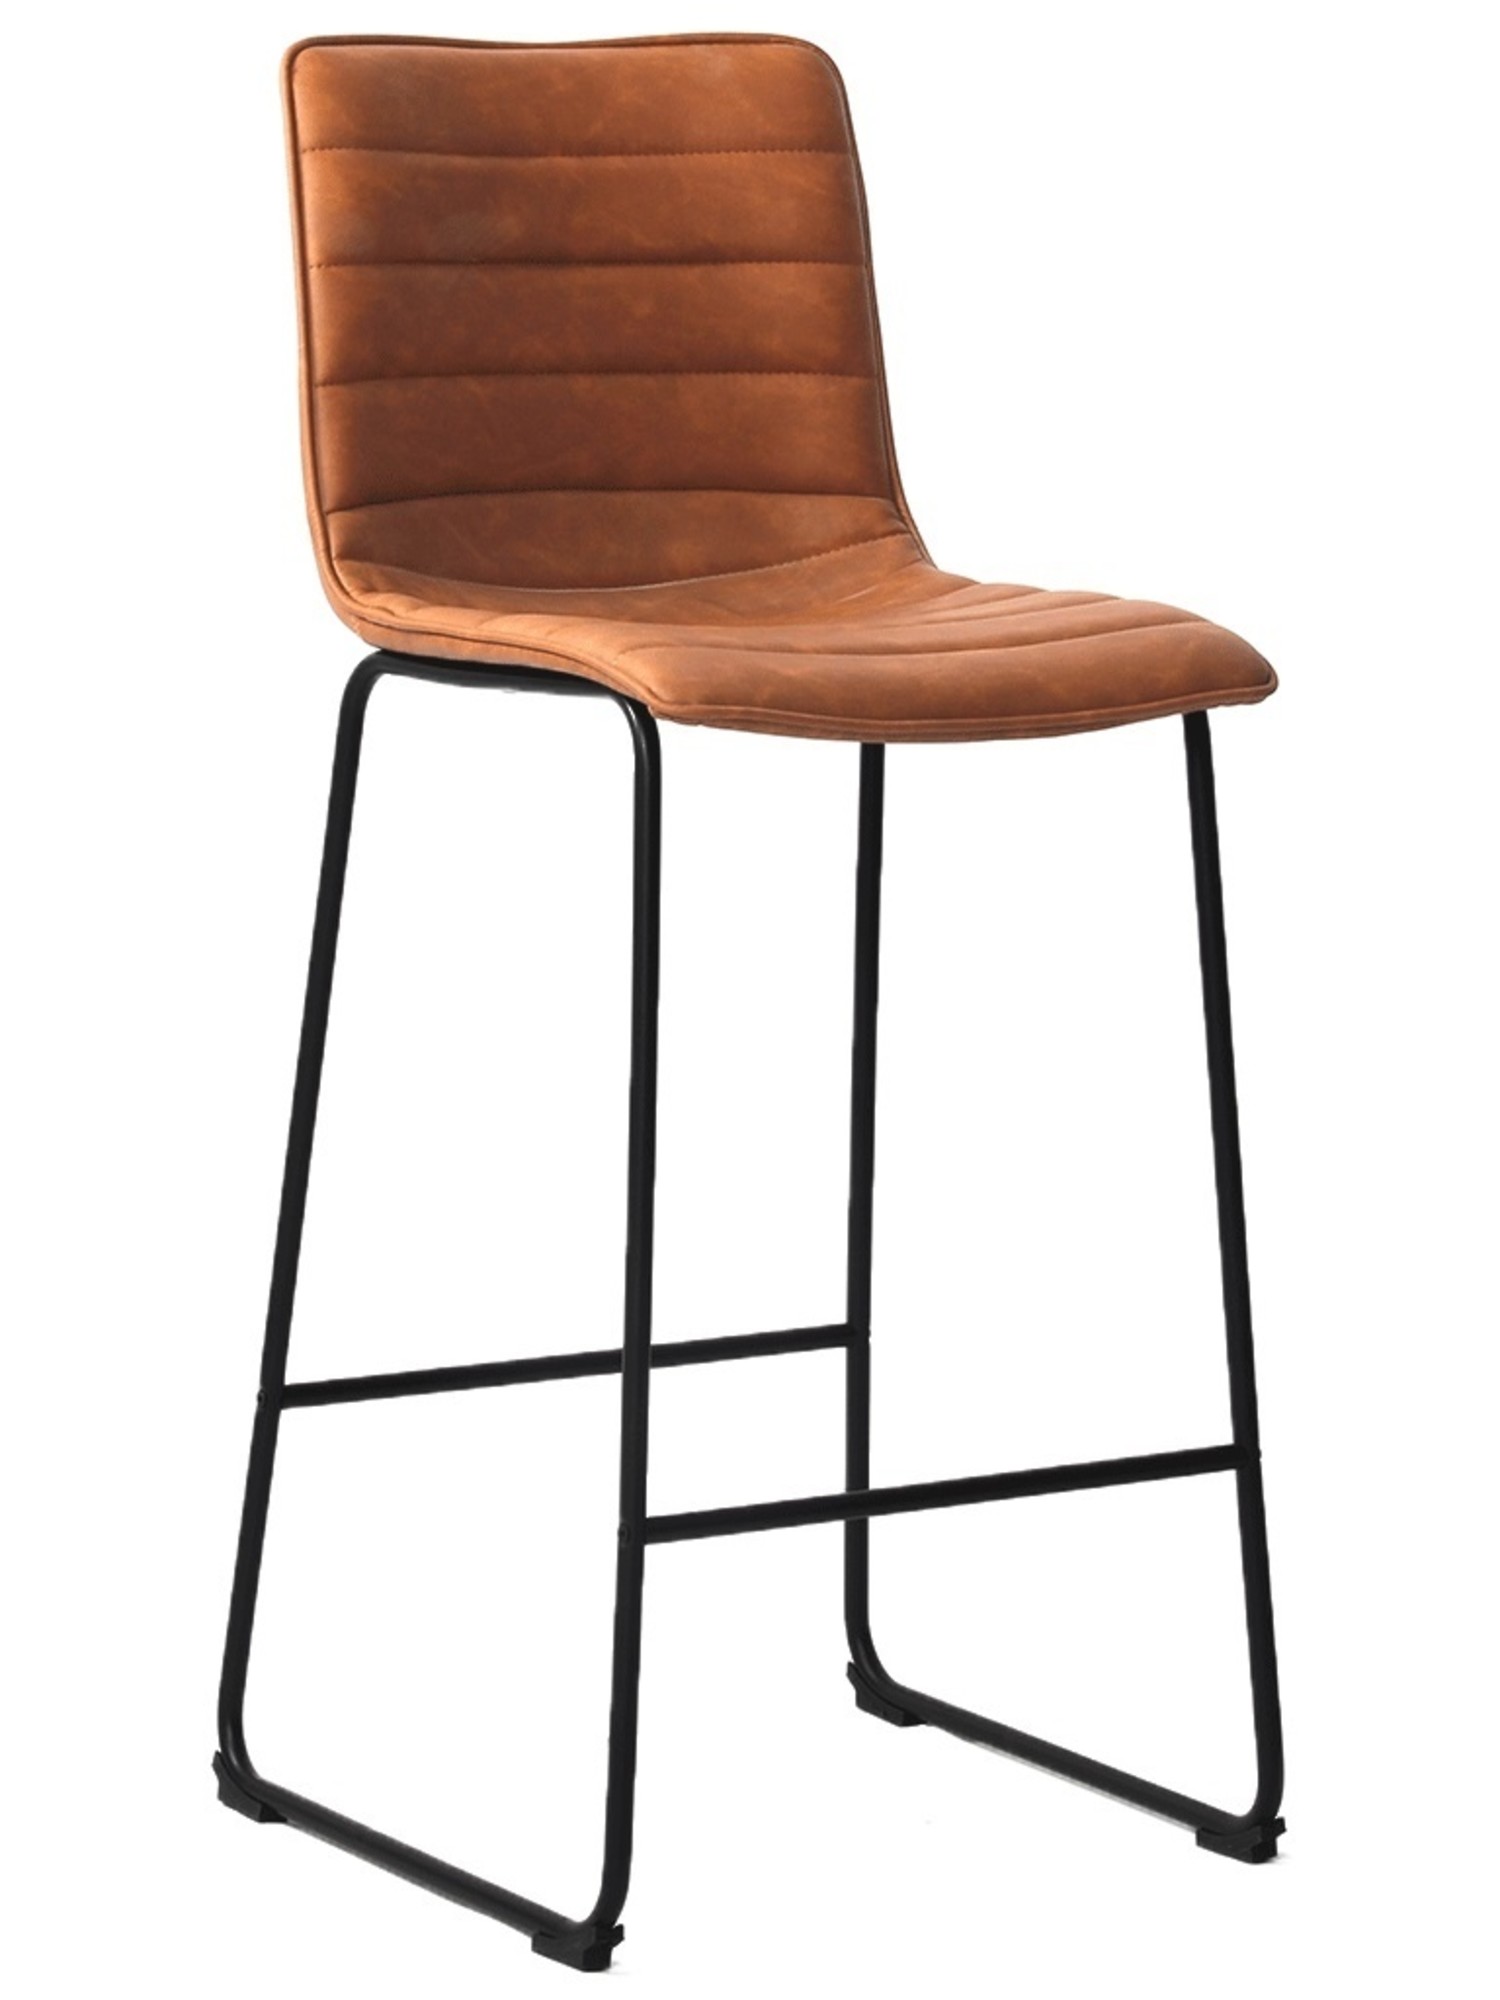 Industrial Bar Stool Ryan Cognac PU - Shipped within 24 hours! - Furnwise